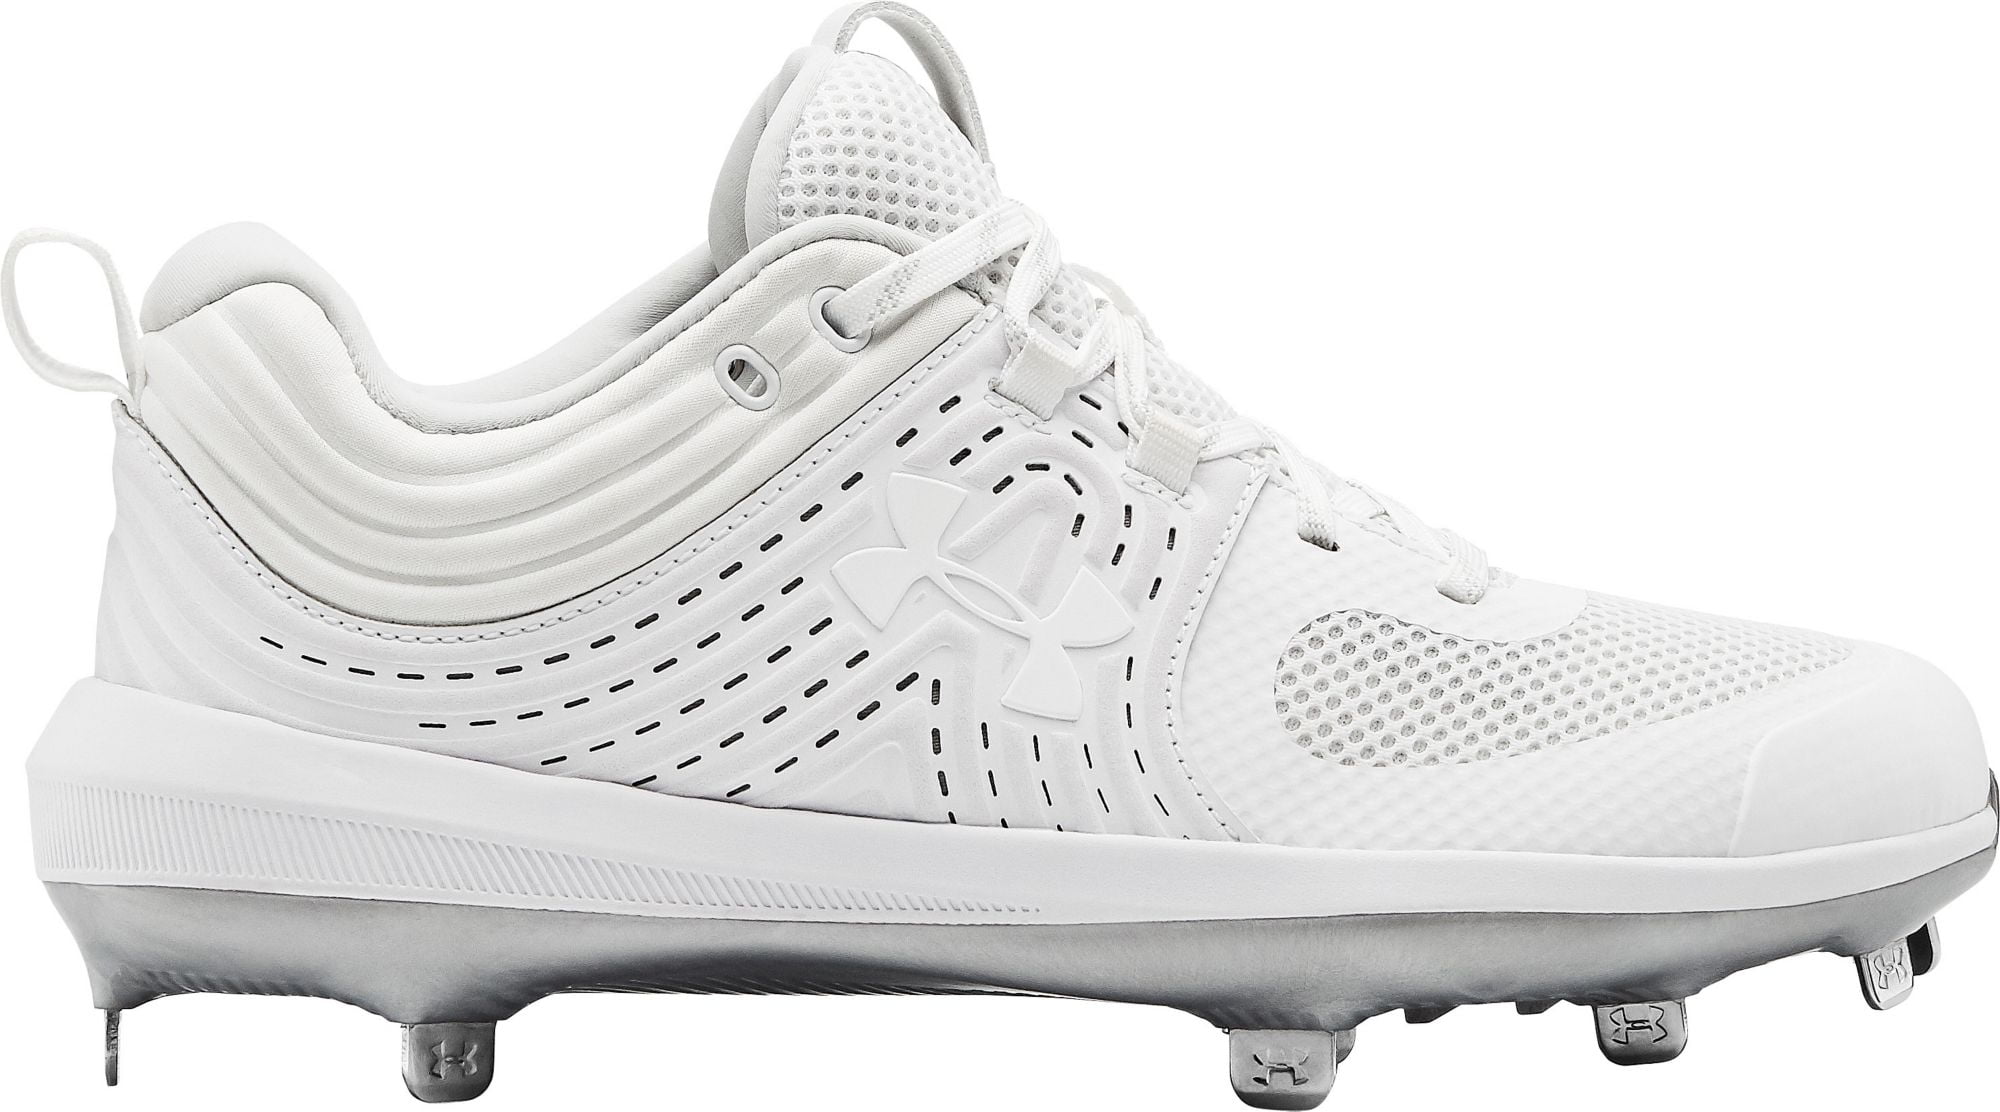 under armour metal softball cleats